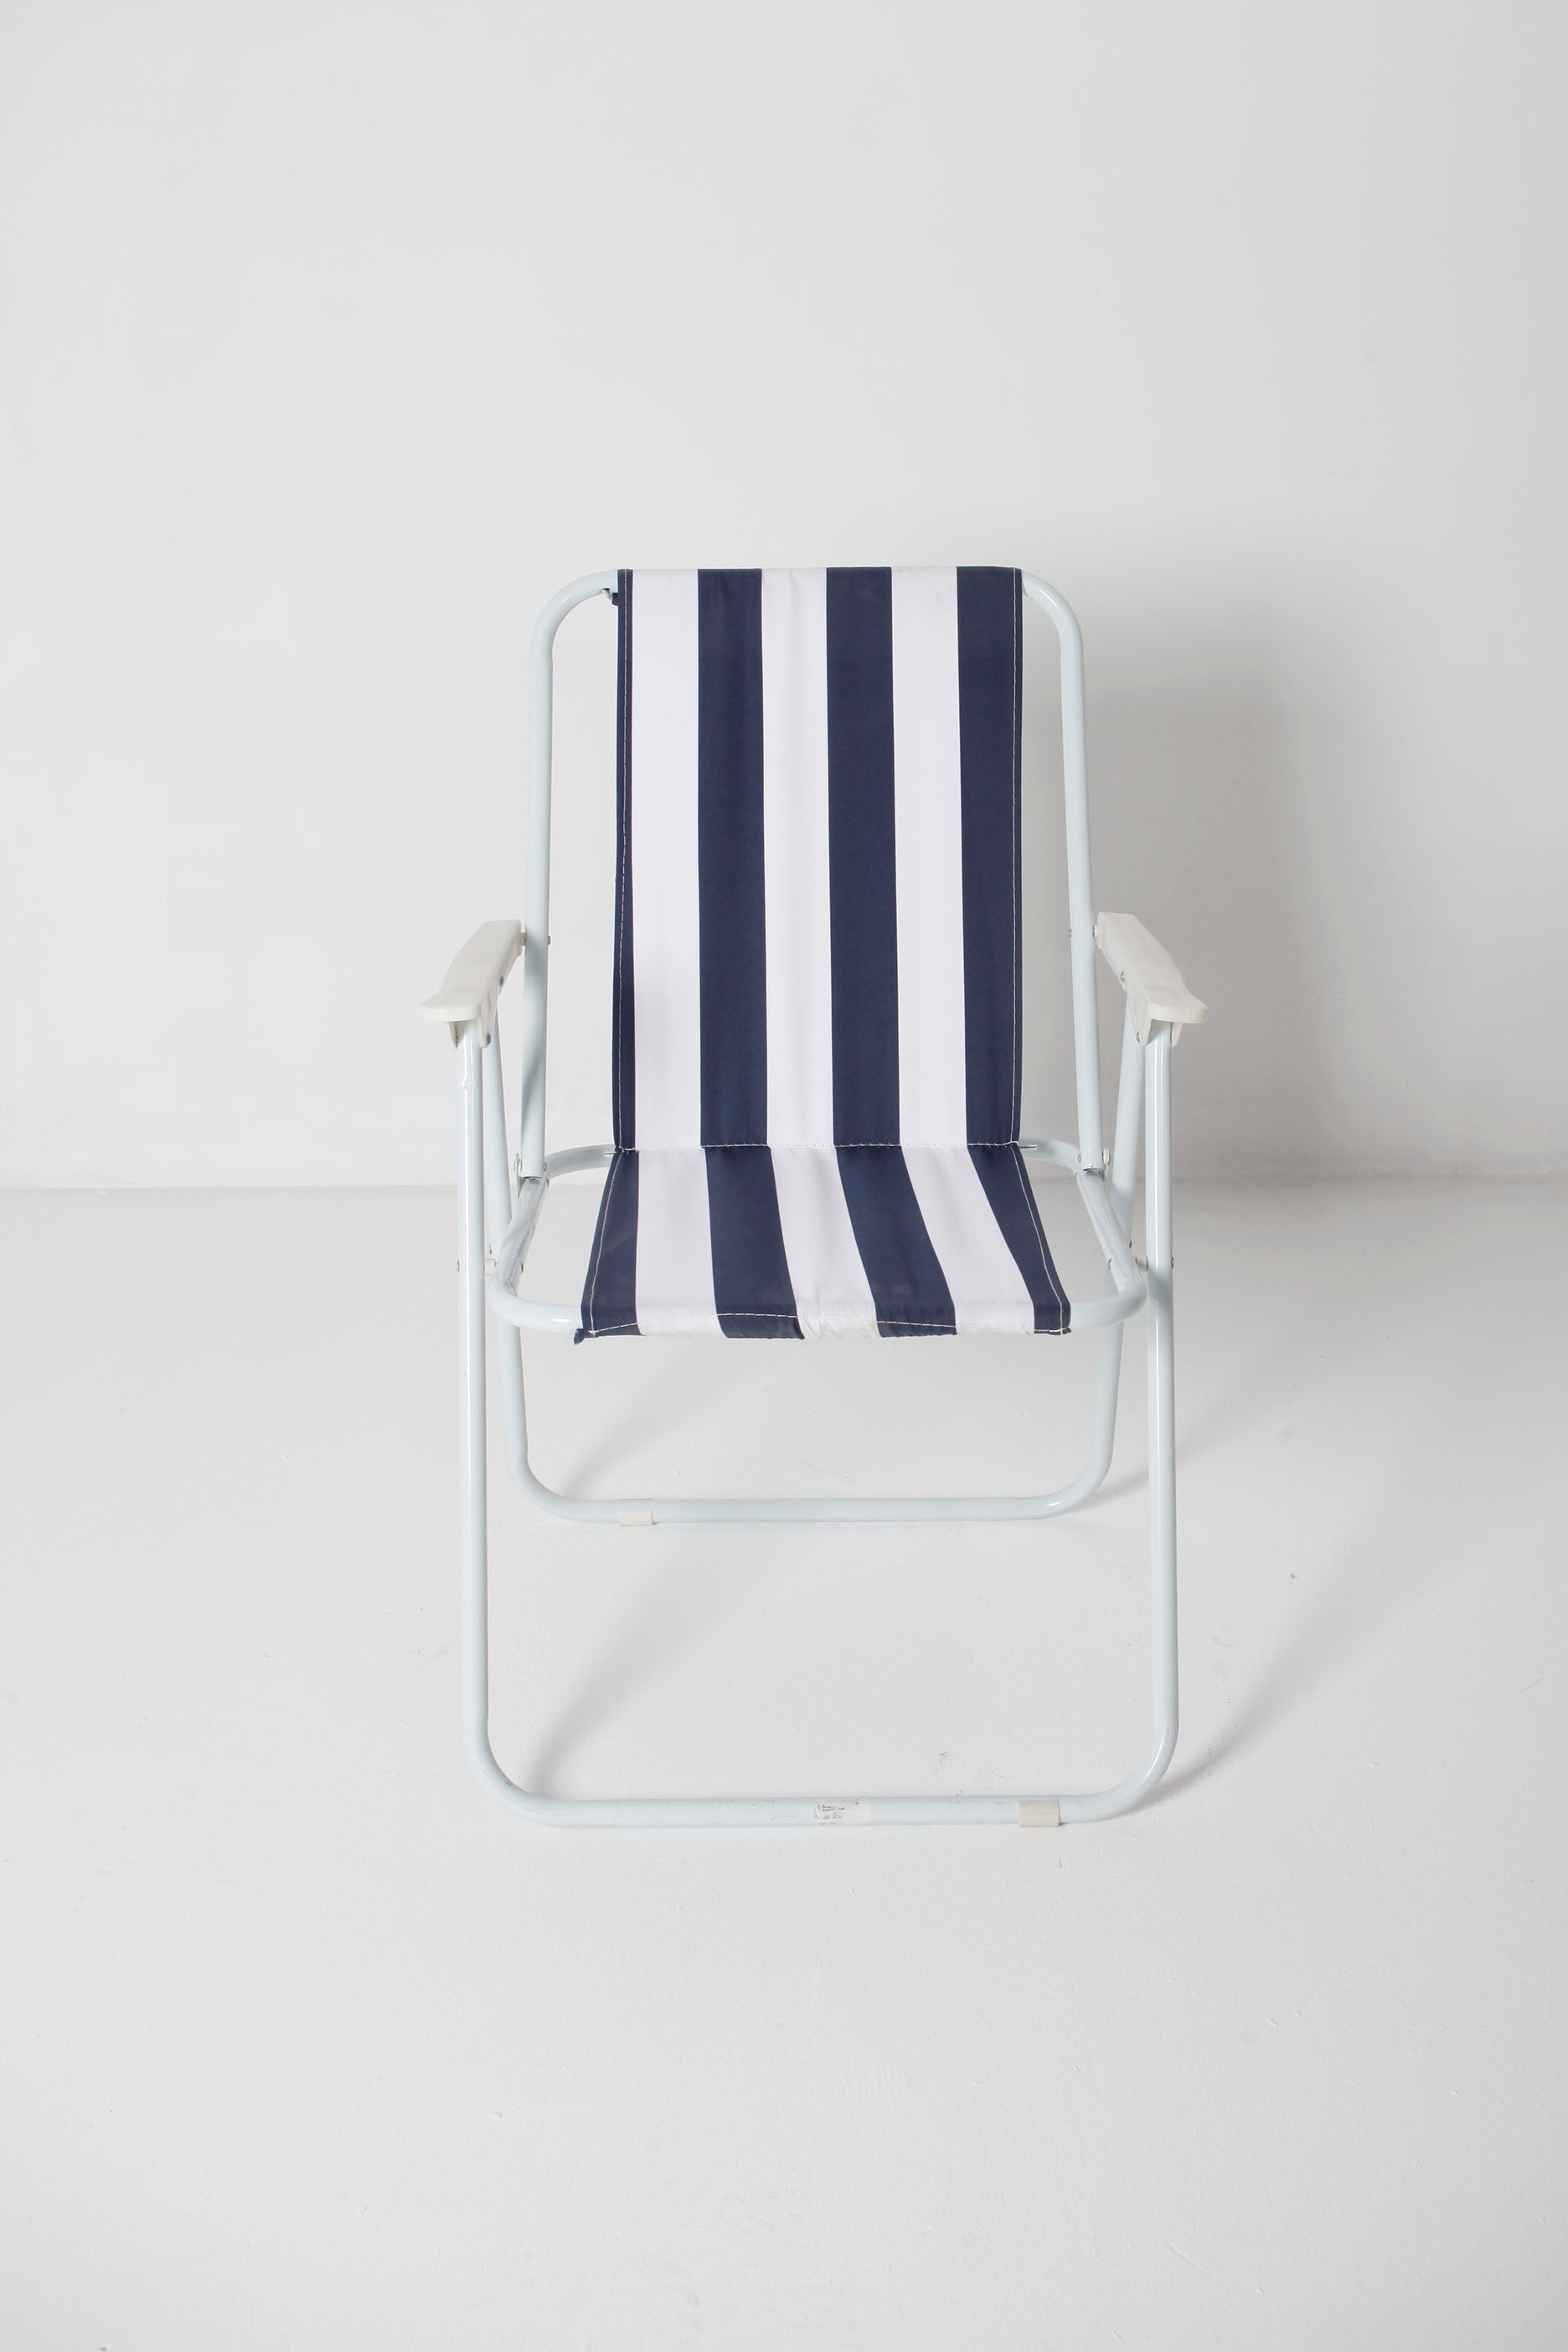 Blue and White Striped Deck Chair